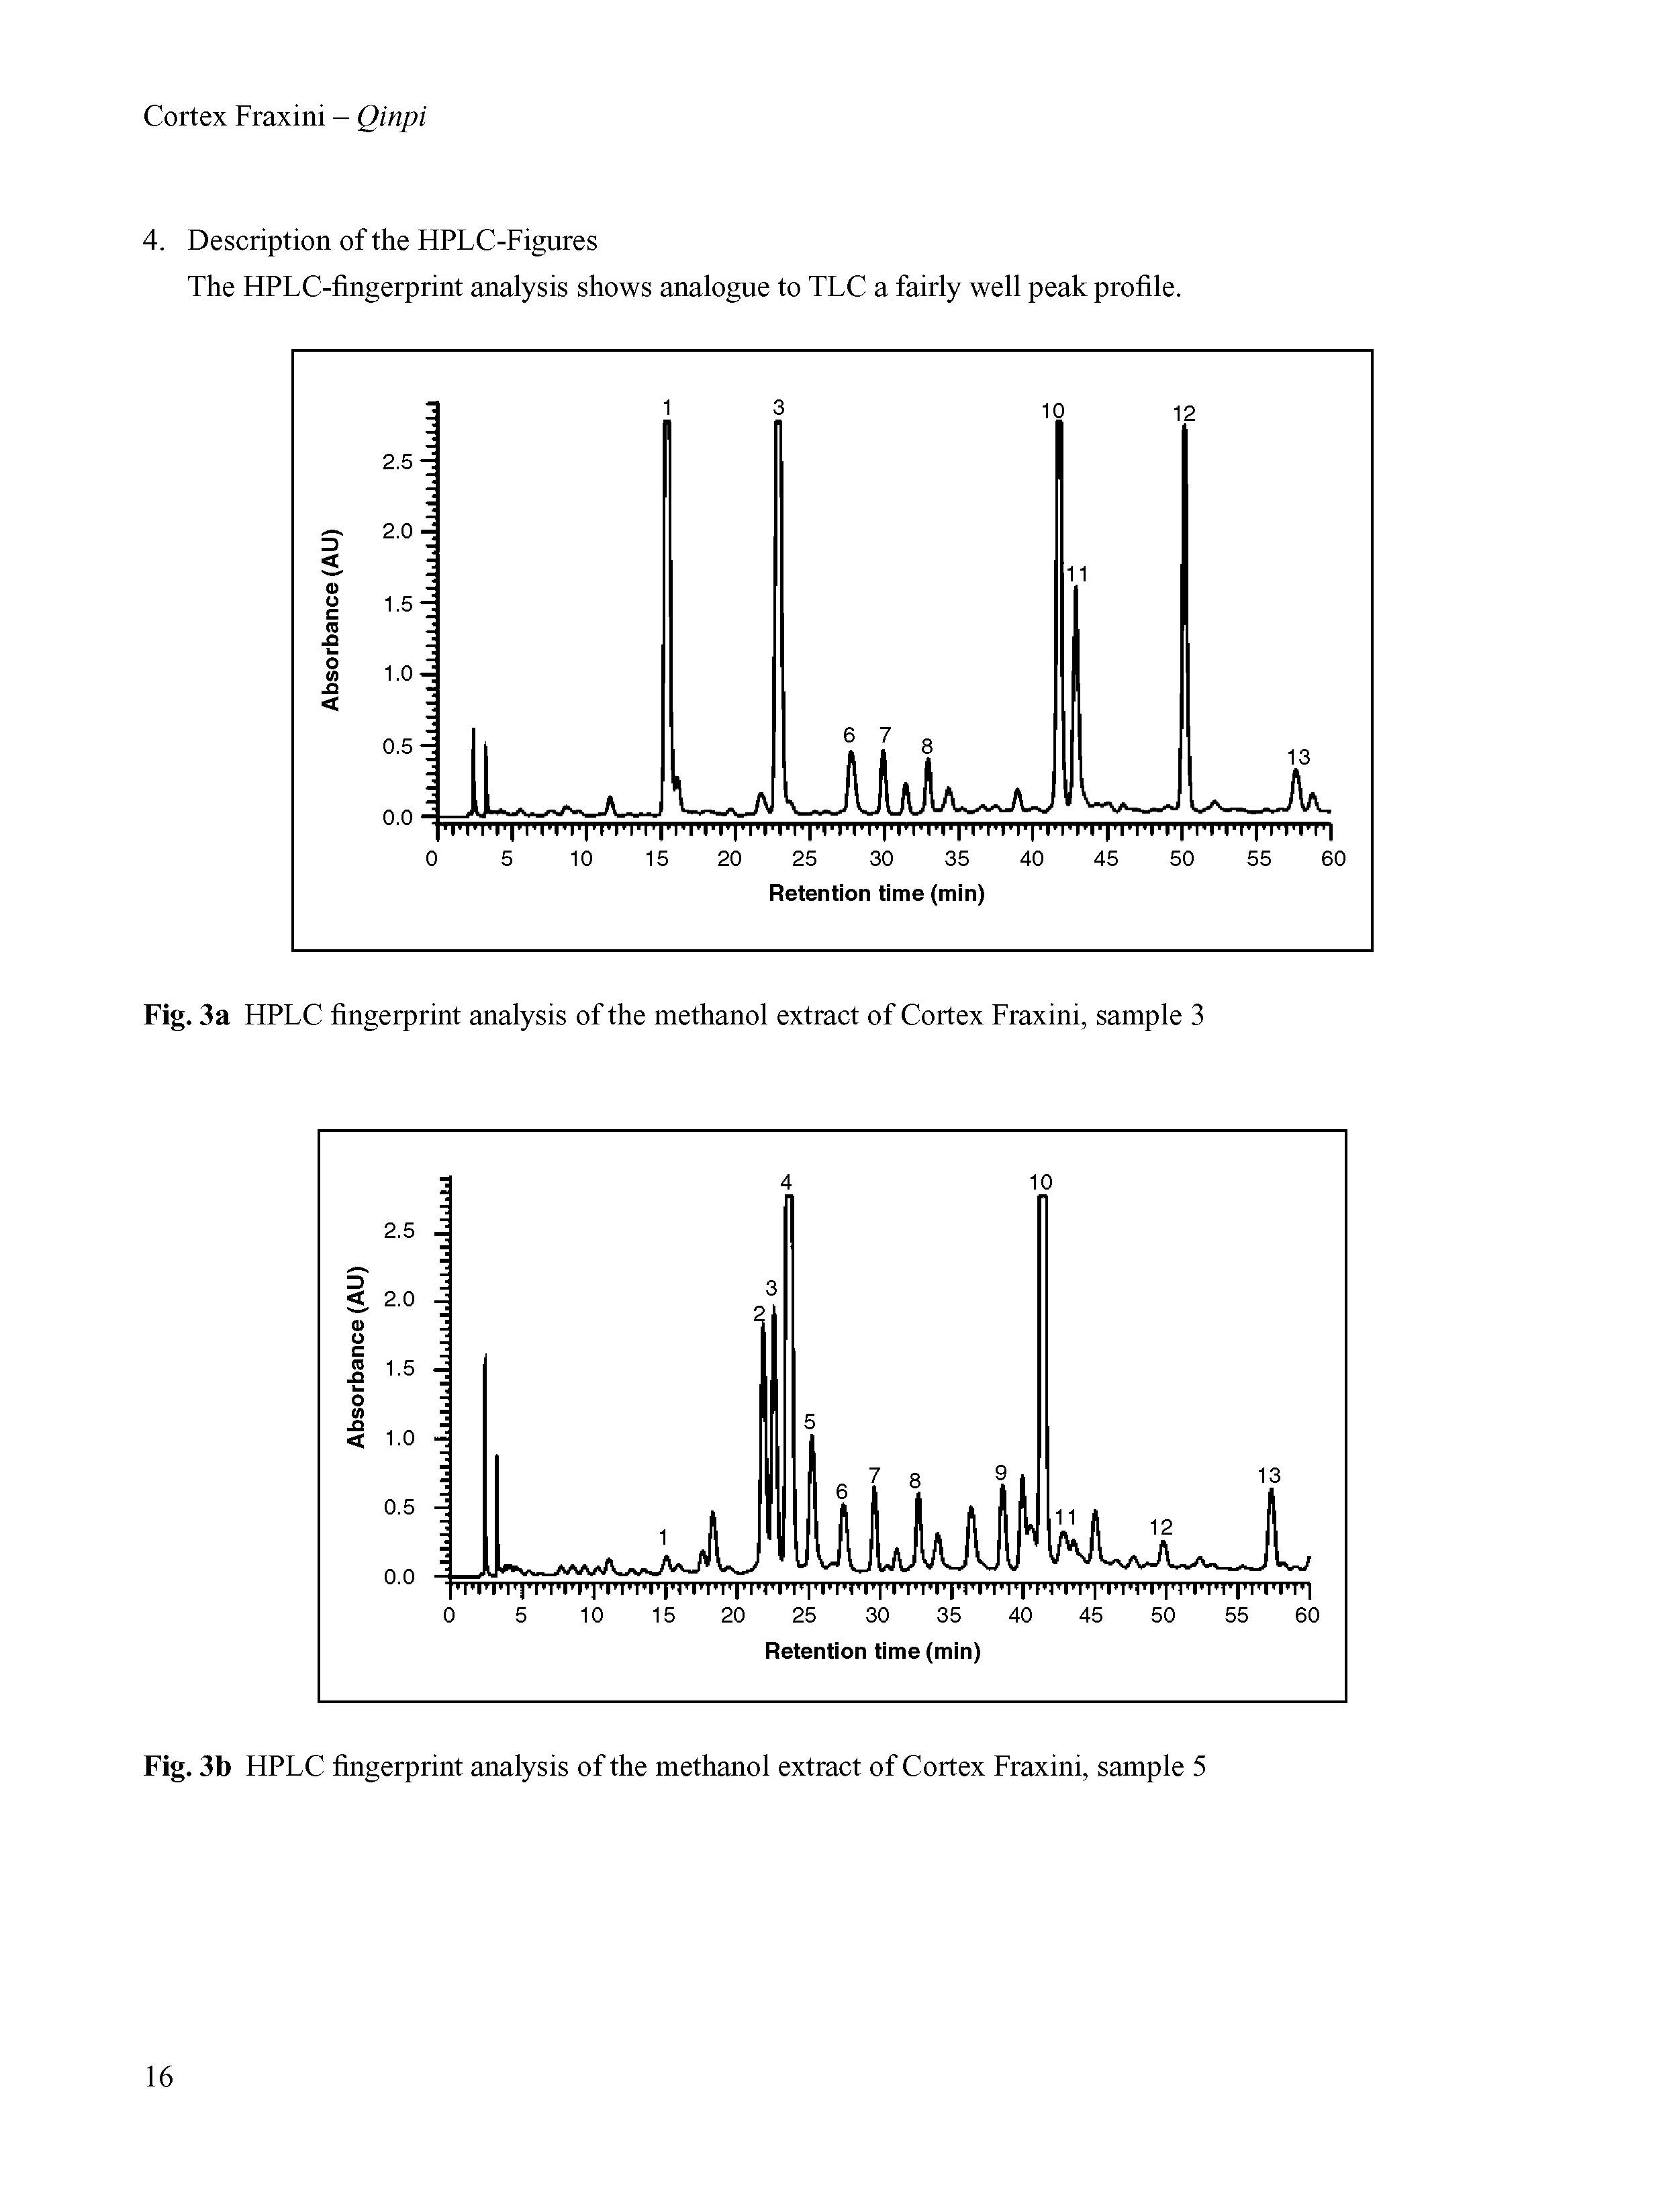 Fig. 3a HPLC fingerprint analysis of the methanol extract of Cortex Fraxini, sample 3...